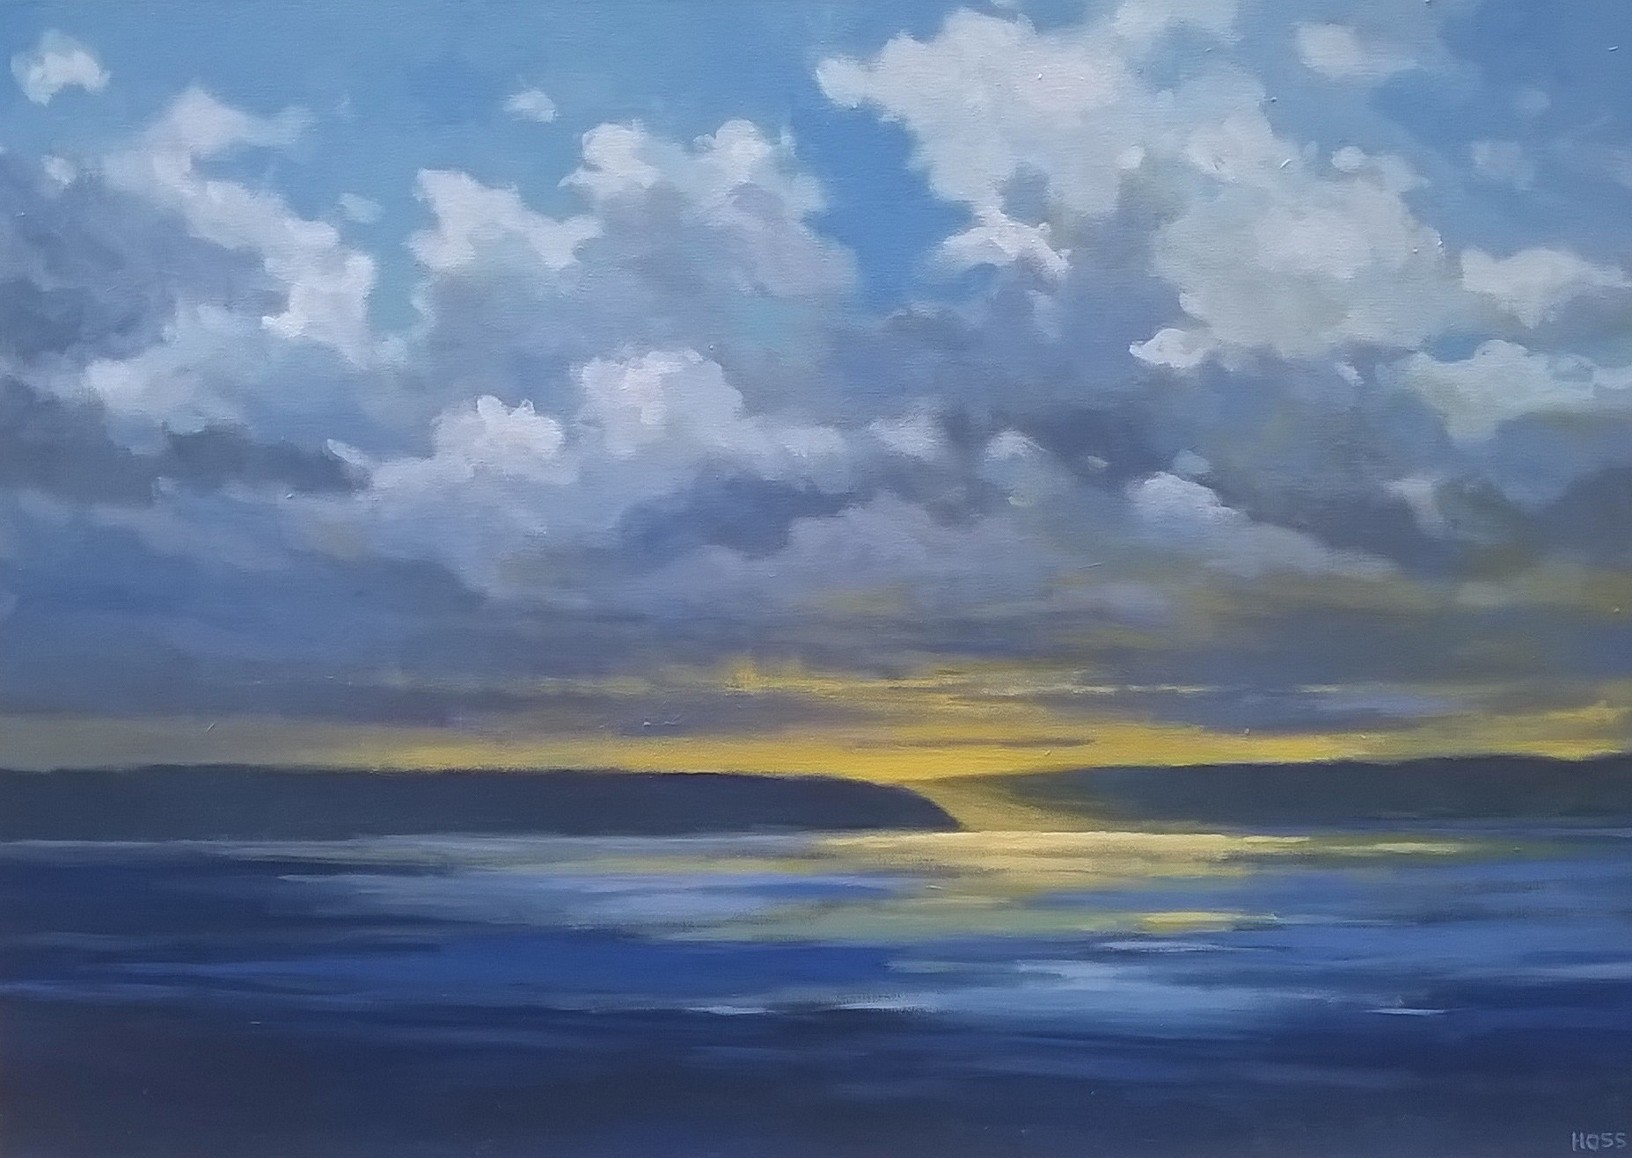 Light Passage | Acrylic on Canvas, 42 x 30 in | $4,000 | Sold